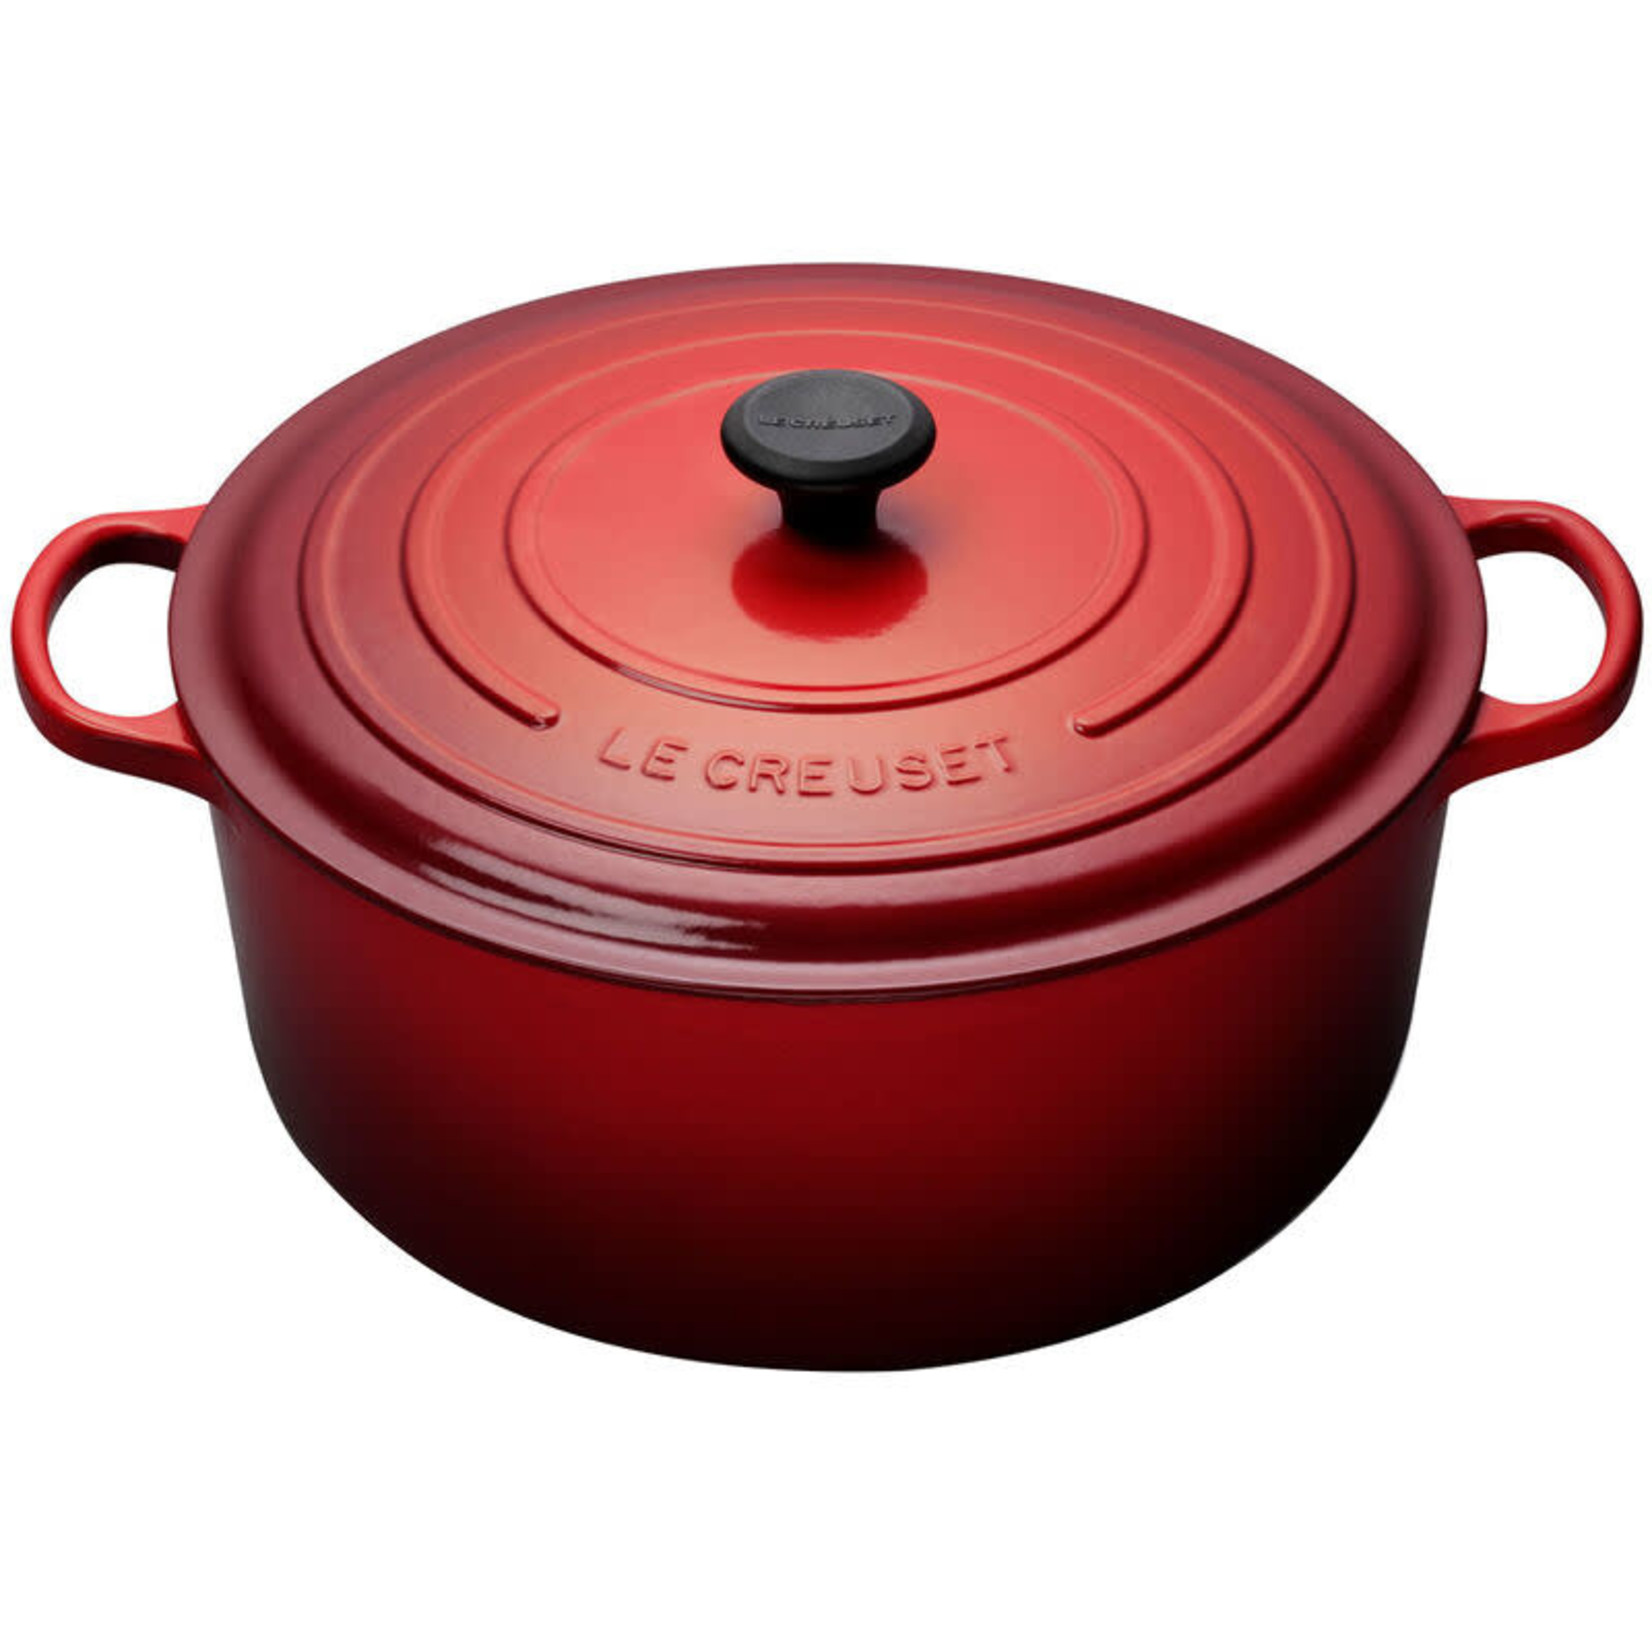 LE CREUSET LE CREUSET Round French Oven 12L